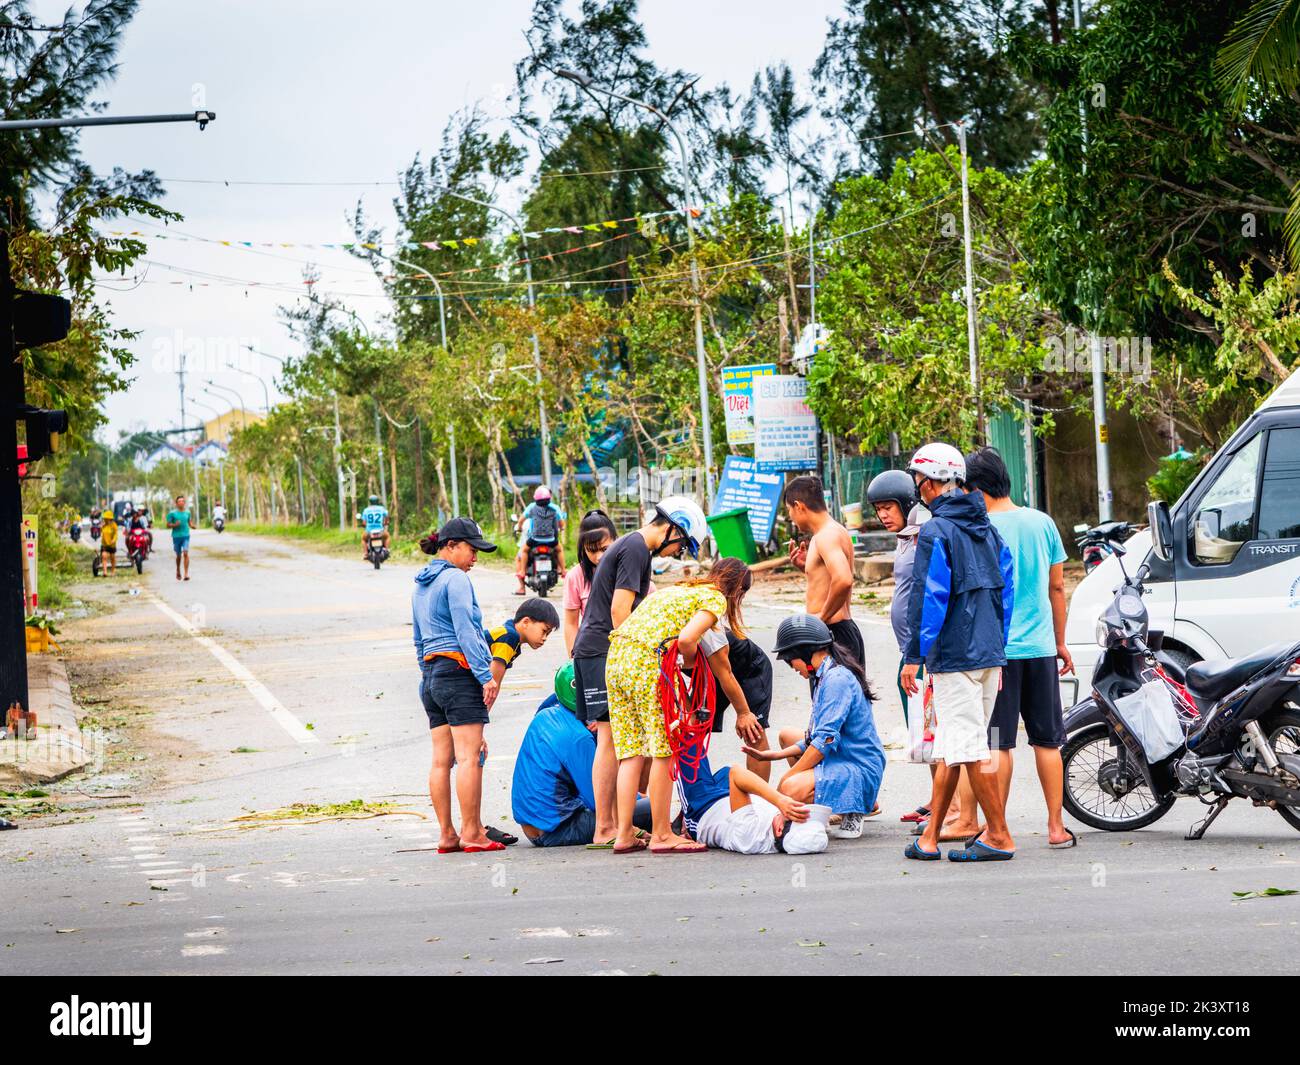 Motorbike accident with people attending a male that is on the ground at big intersection of An Bang Beach, Vietnam. Stock Photo